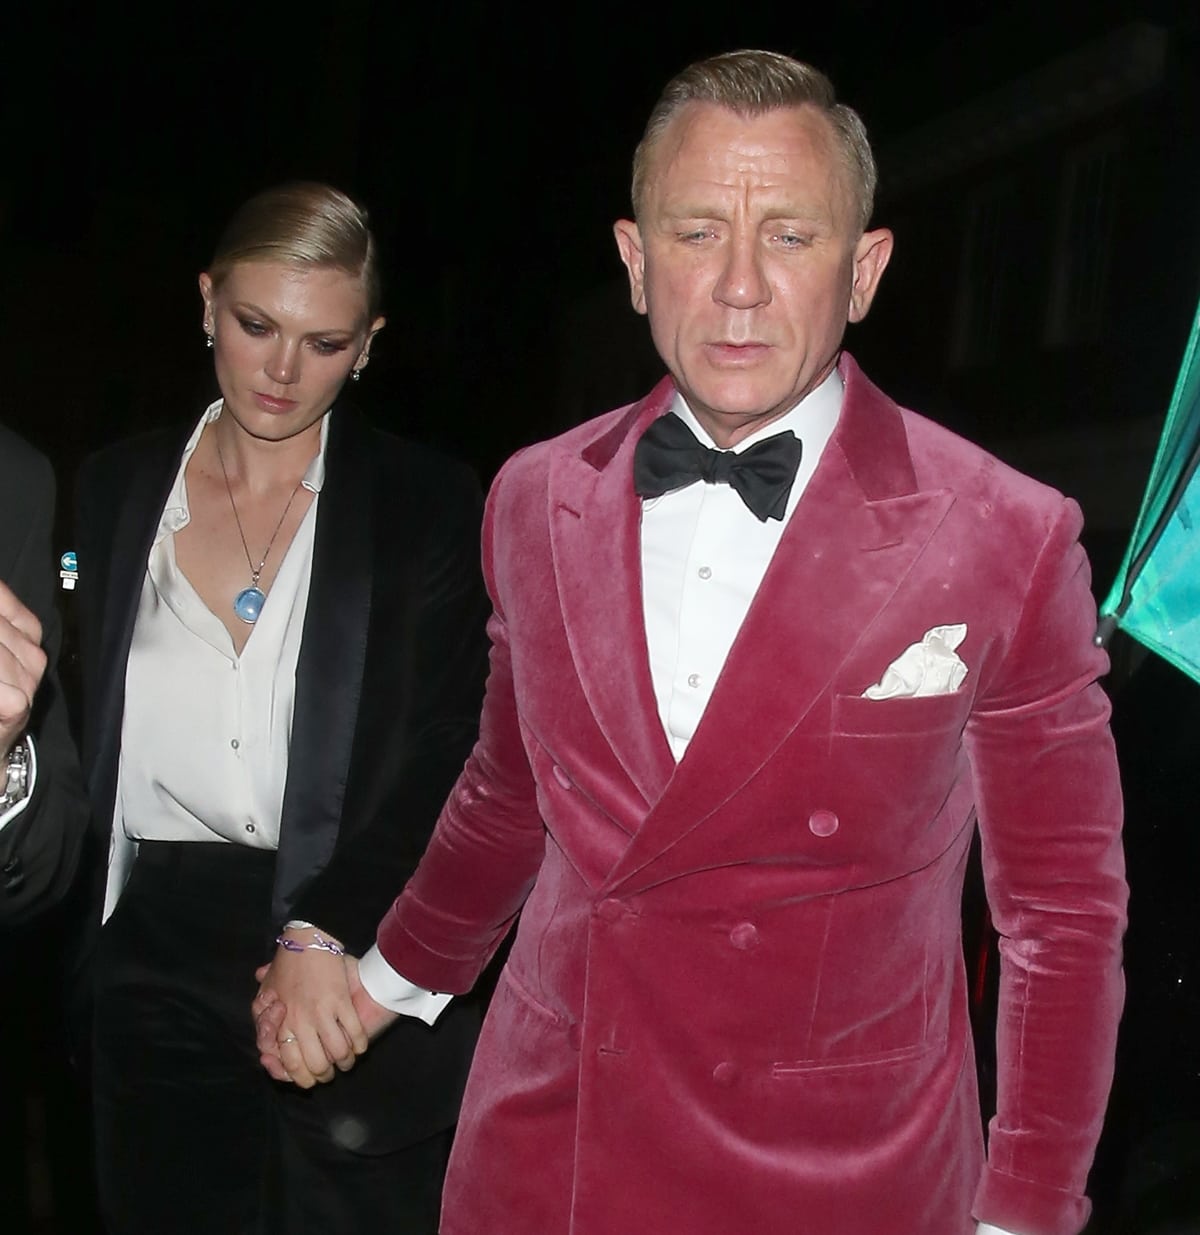 Ella Craig is the daughter of Daniel Craig and his former wife Fiona Loudon